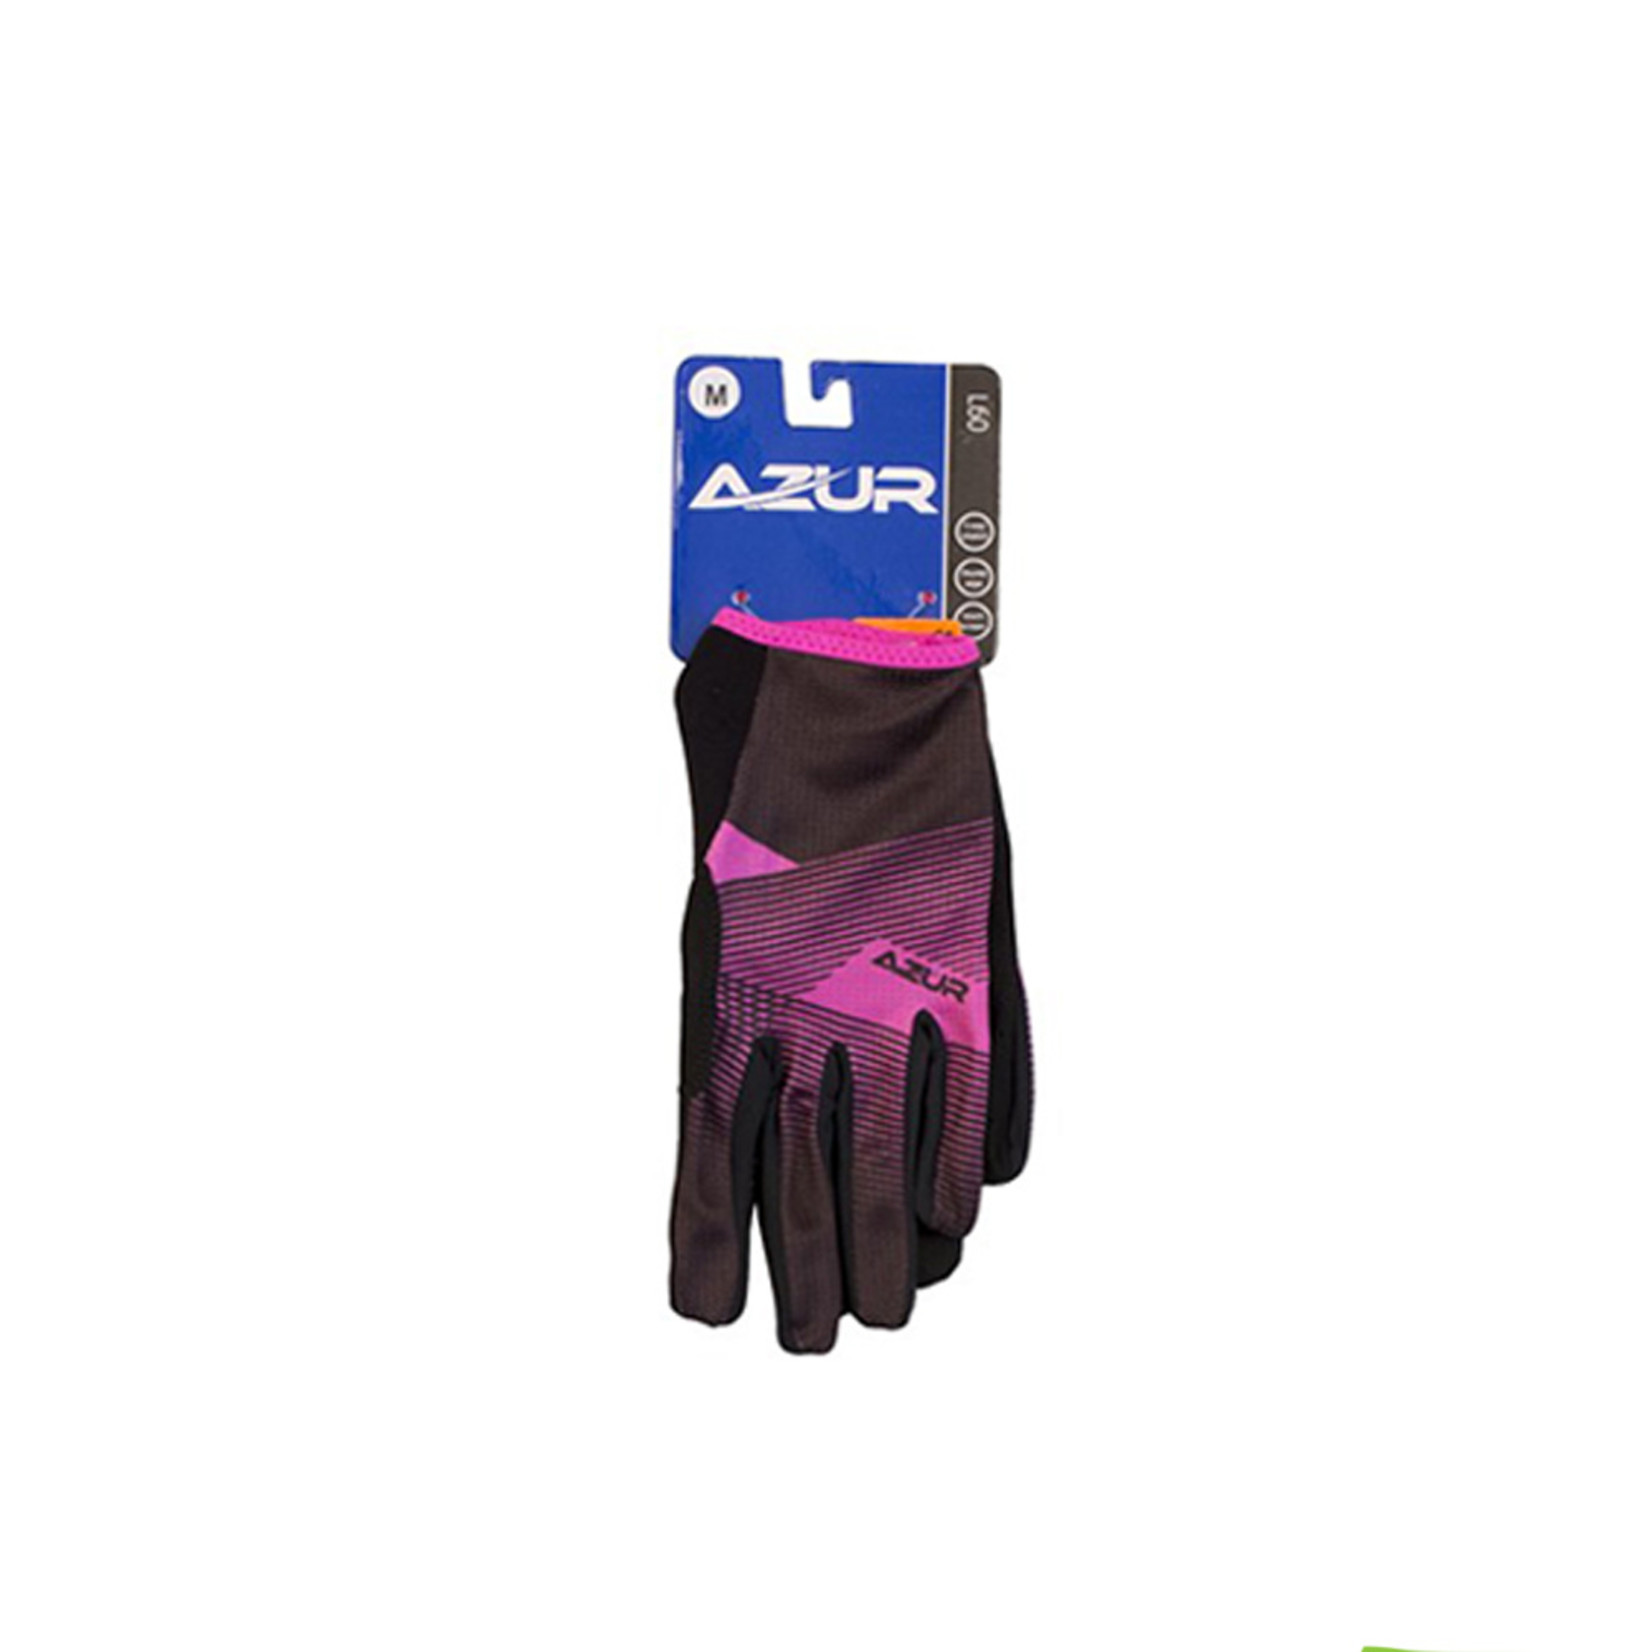 Azur Azur Bike/Cycling Lightweight Glove - L60 Series - Breathable - Pink - X-Large